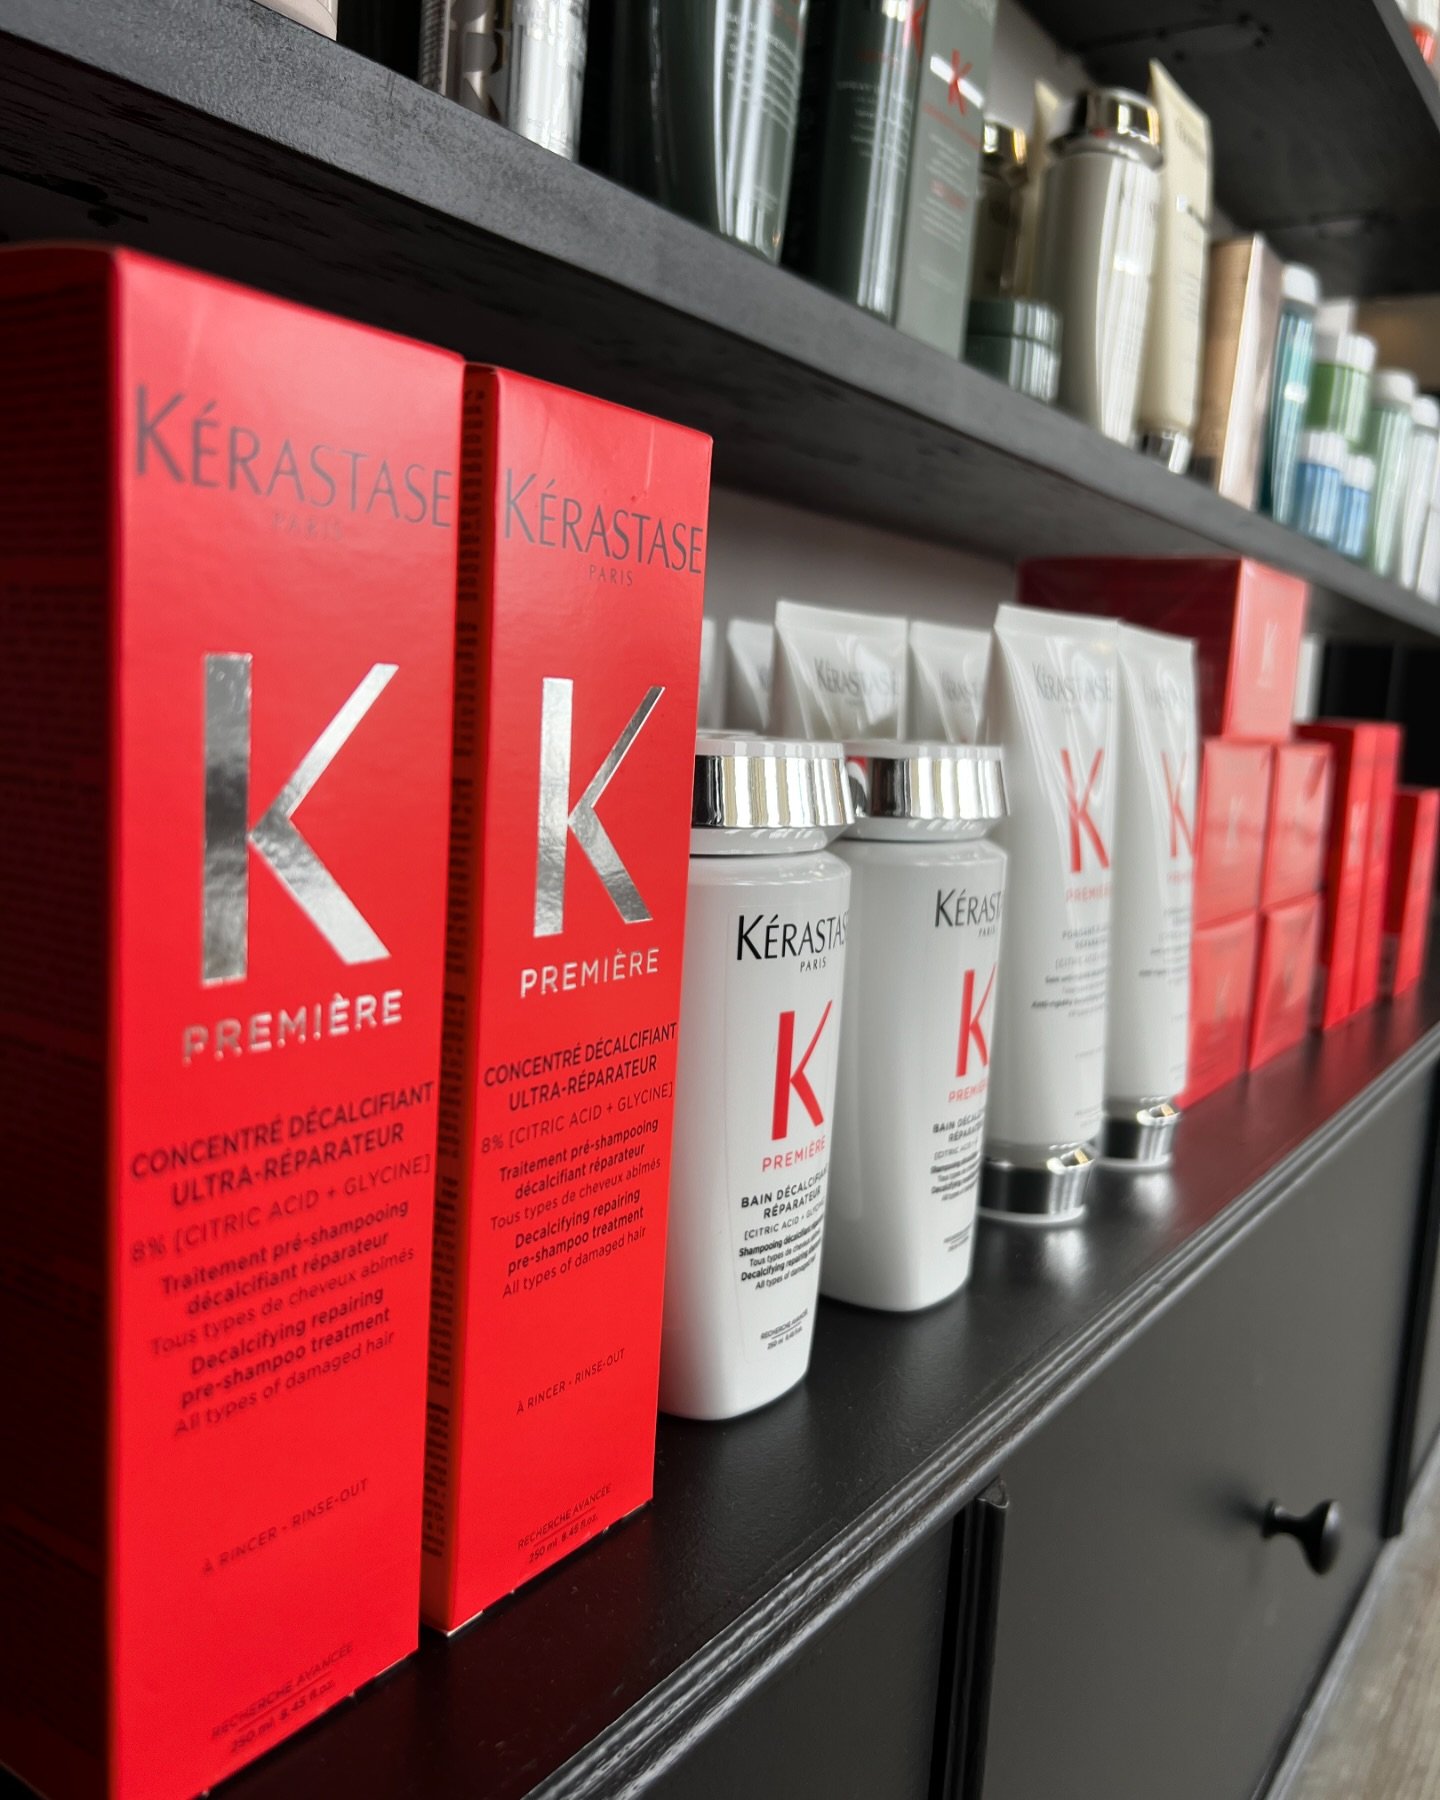 ⚡️You have calcium buildup⚡️ 

We all experience calcium buildup from our water, and now we have a solution. @kerastase_official NEW Premi&eacute;re is the answer. 

A decalcifying and repairing system for all hair types. 

Calcium turns hair brittle